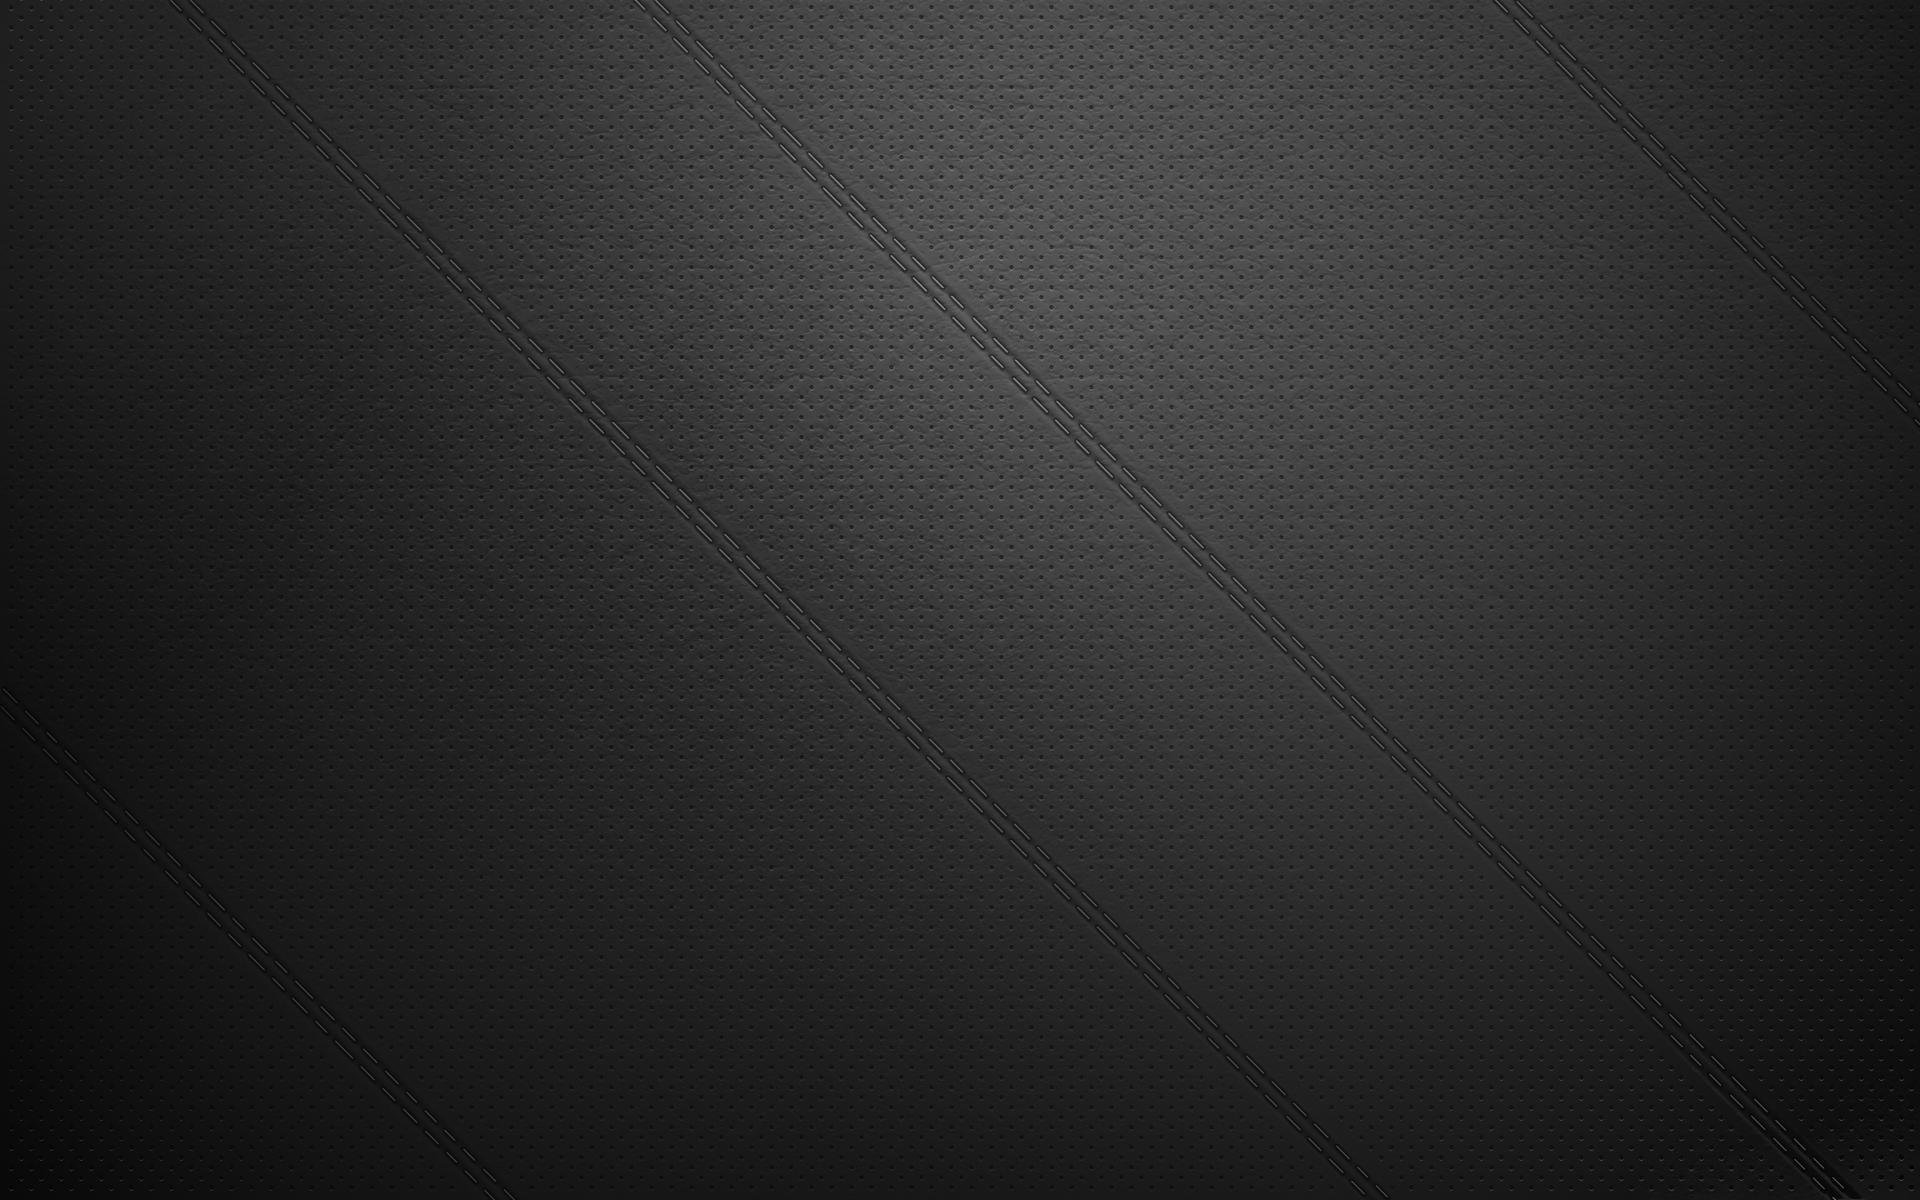 Cool Pattern Wallpapers Android Apps Games On Brothersoft cool - Plain  Black Background Png - 1920x1200 Wallpaper 